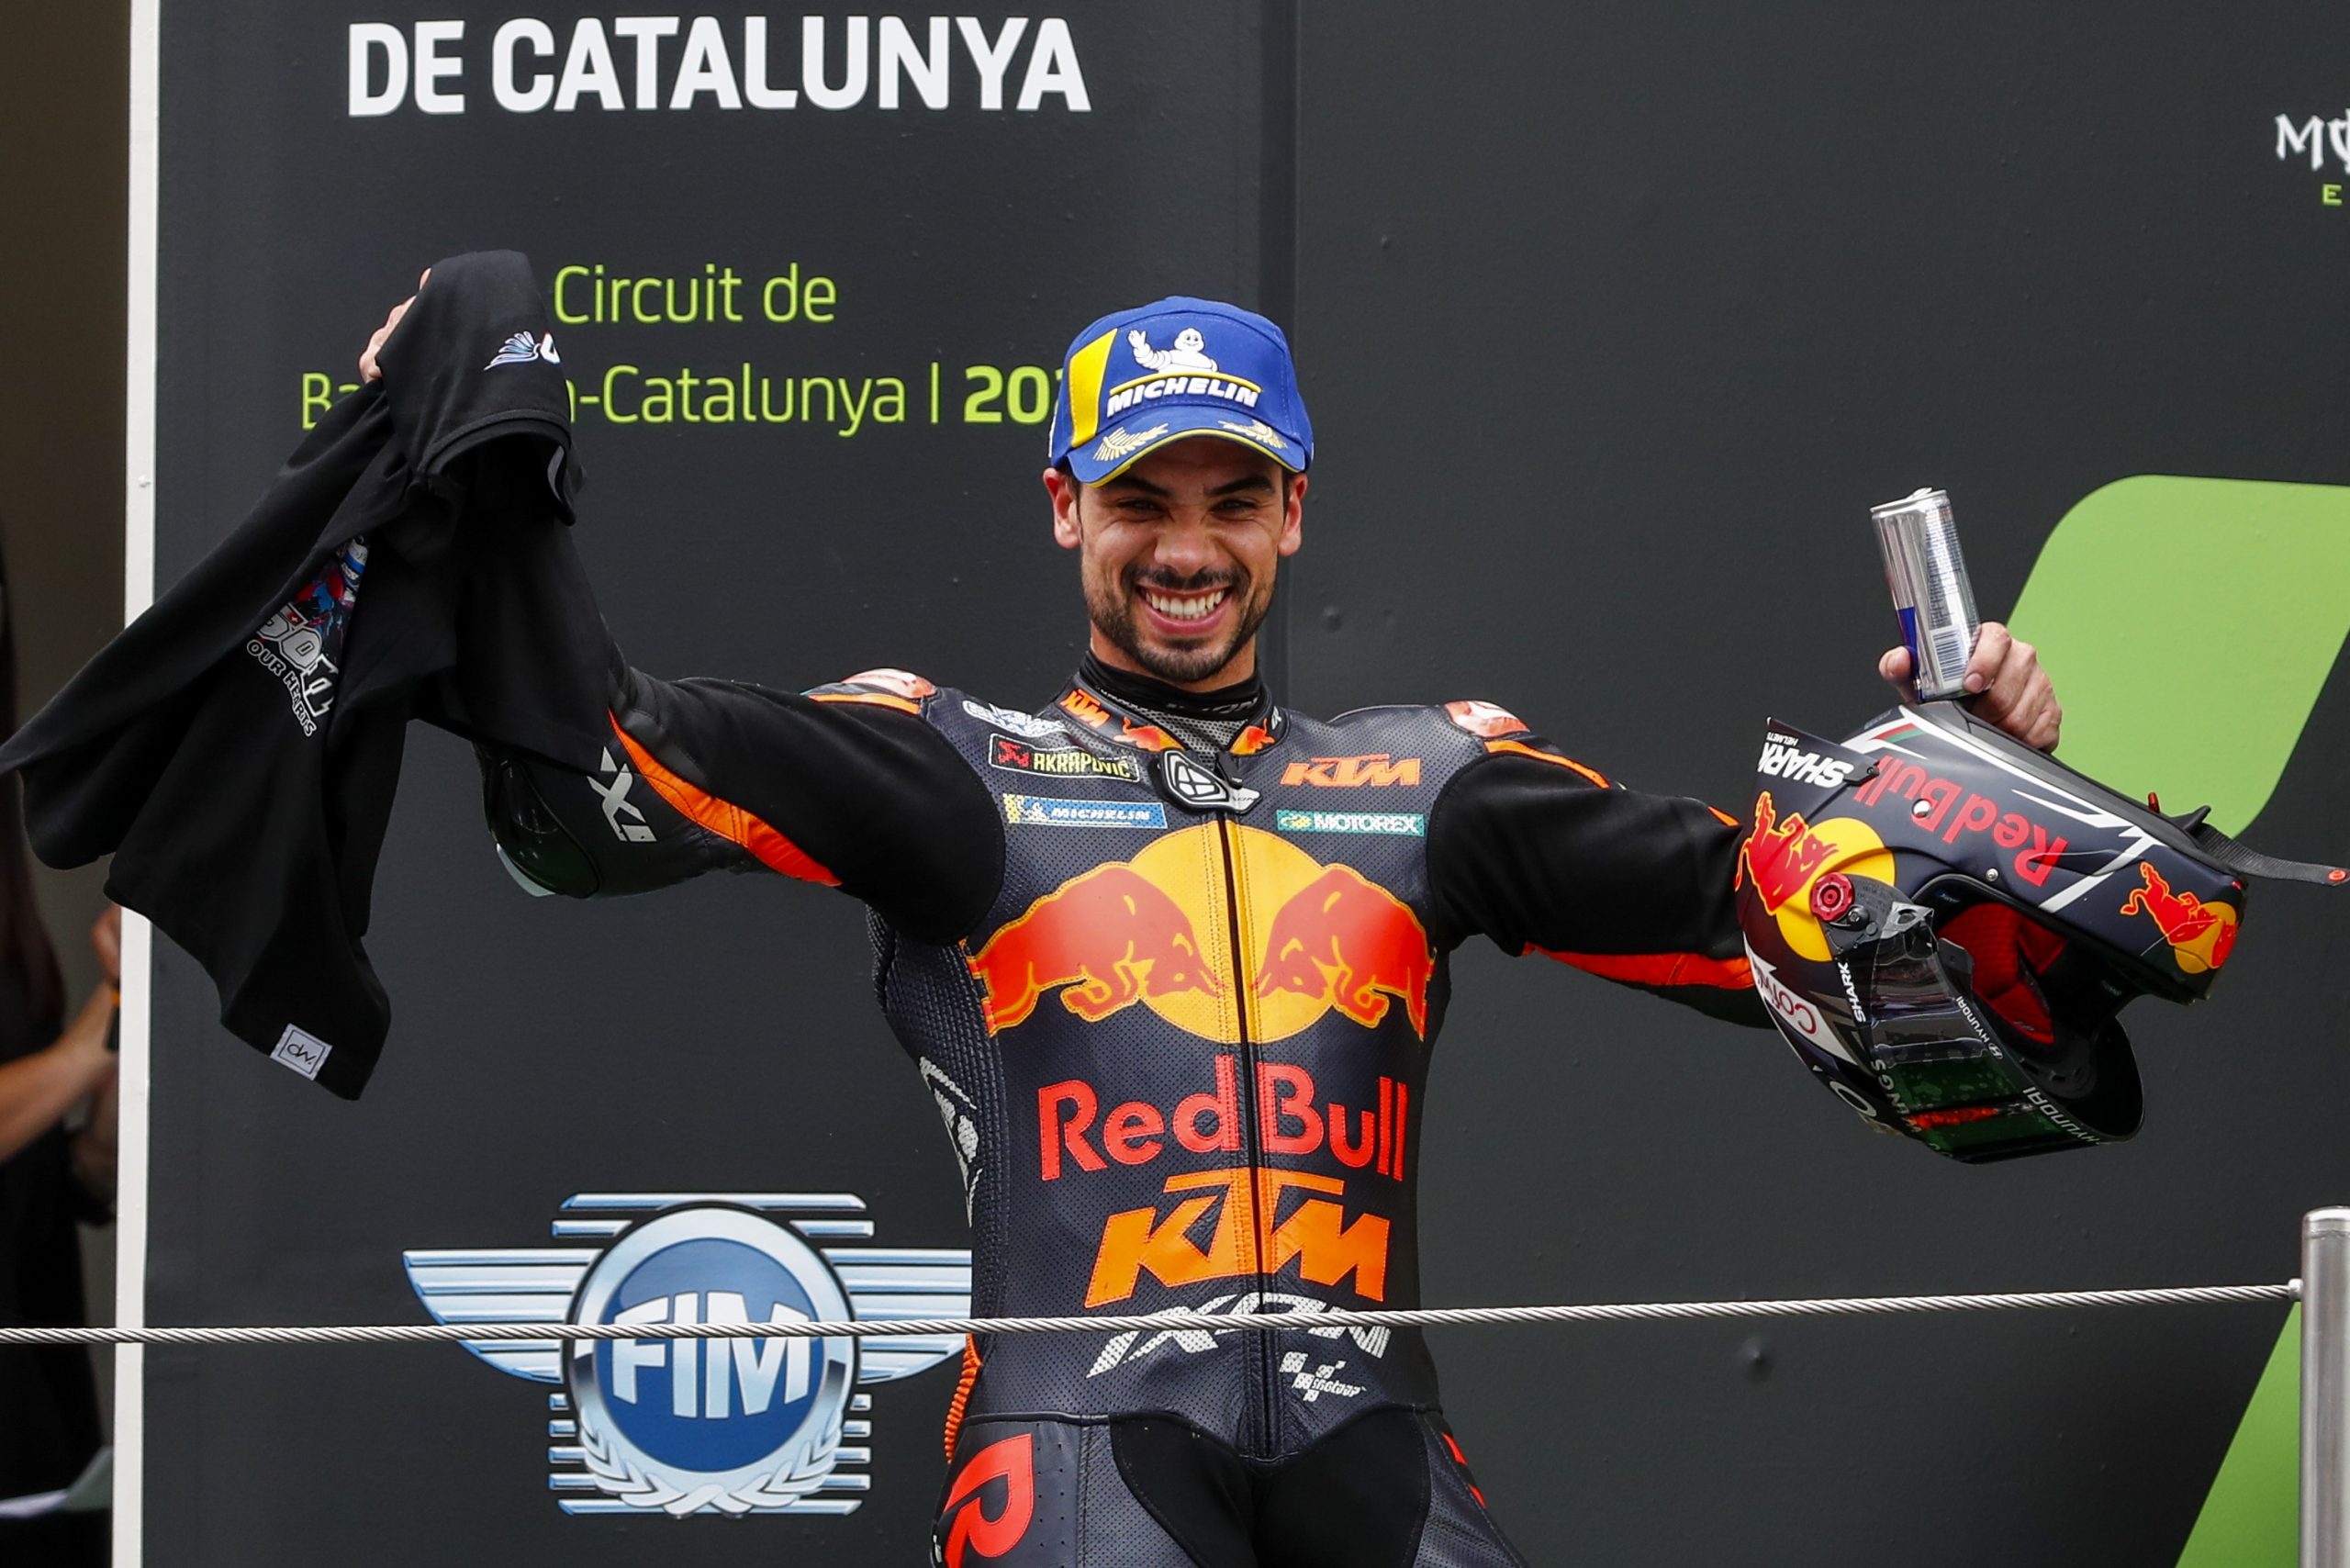 Oliveira wins MotoGP race in front of nearly 20,000 in Spain